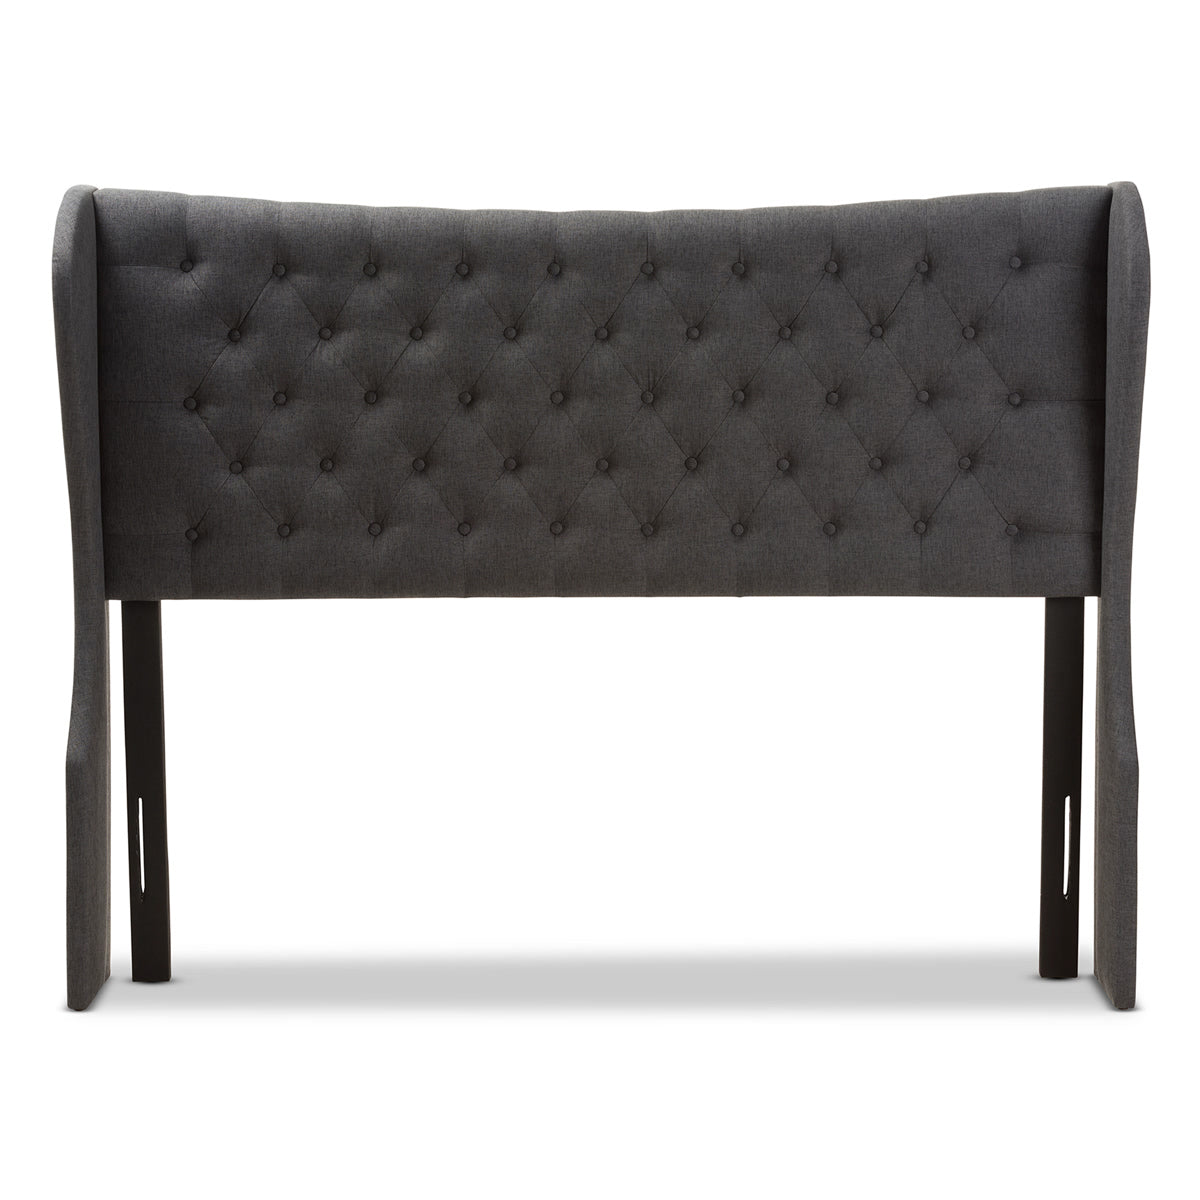 Baxton Studio Cadence Modern and Contemporary Dark Grey Fabric Button-Tufted Full Size Winged Headboard Baxton Studio-Headboards-Minimal And Modern - 2